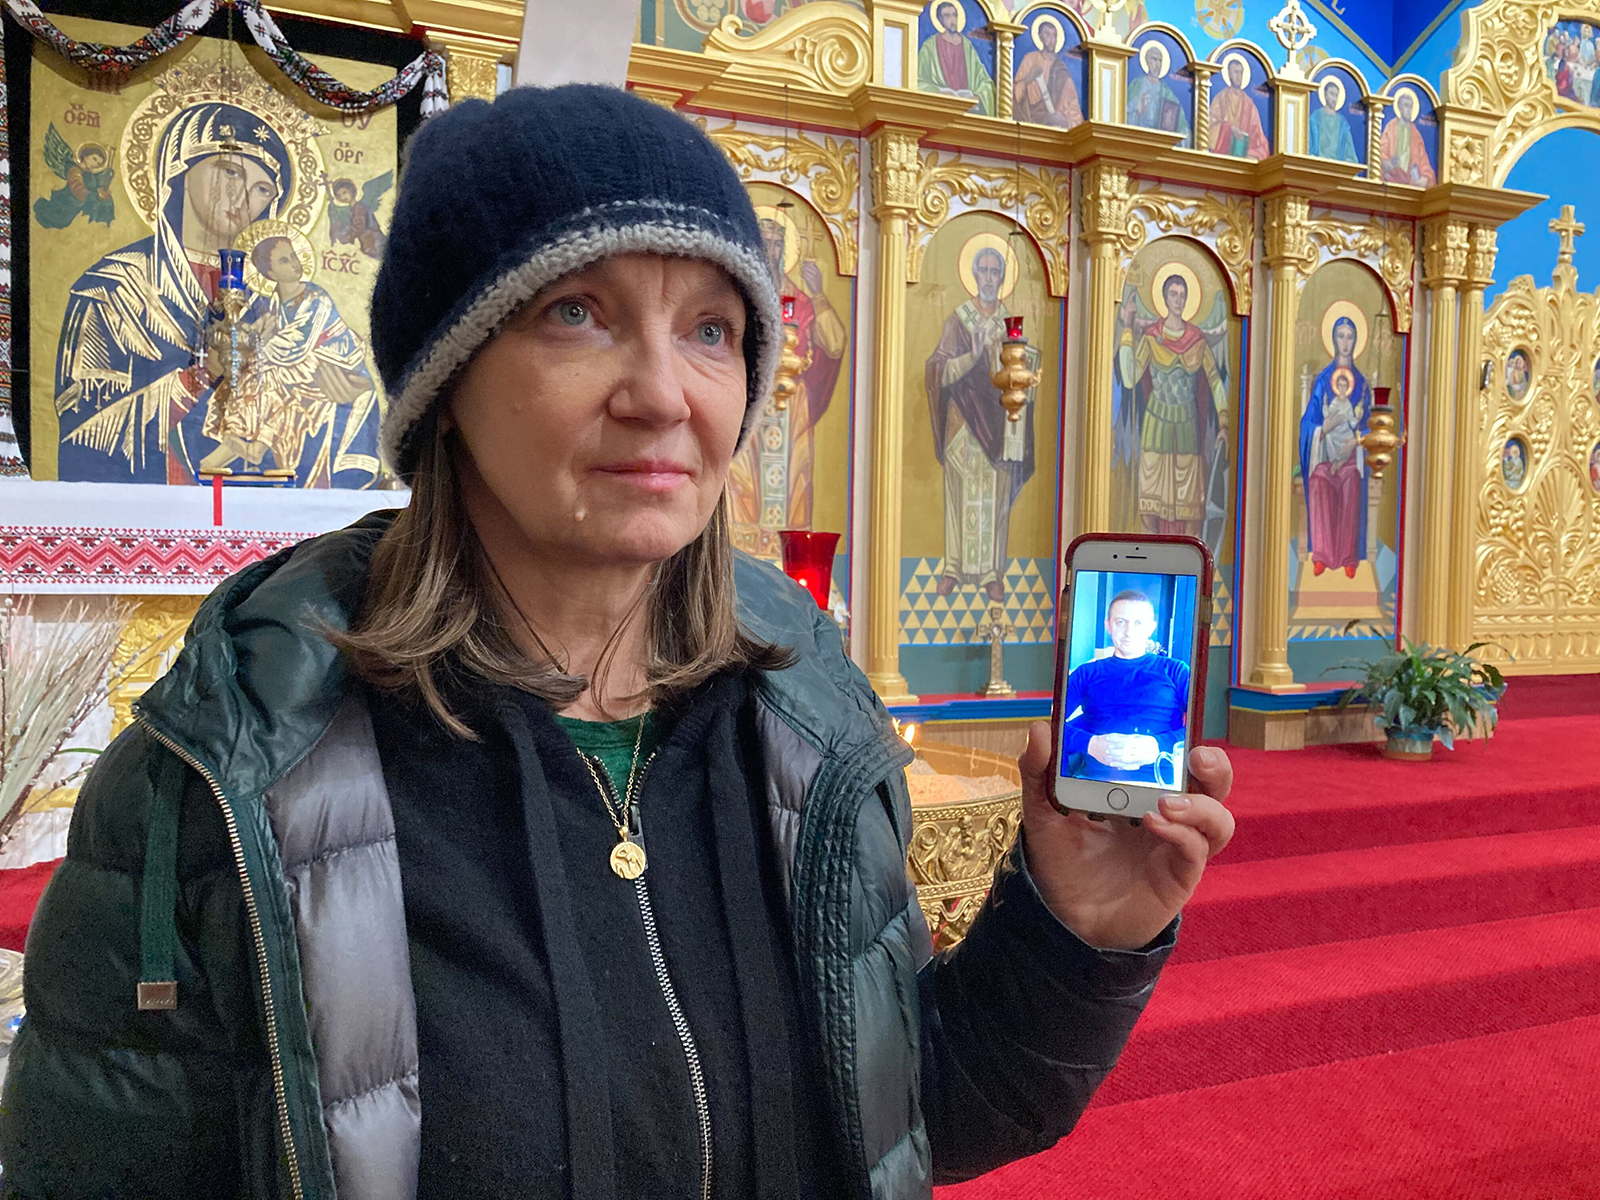 Zoryana Volos speaks at Nativity of the Blessed Virgin Mary, a Ukrainian Catholic Church, Thursday, Feb. 24, 2022, in Los Angeles. Volos said she's worried about her sister’s sons in Ukraine. Here she shows a photo of one of her nephews. RNS photo by Alejandra Molina